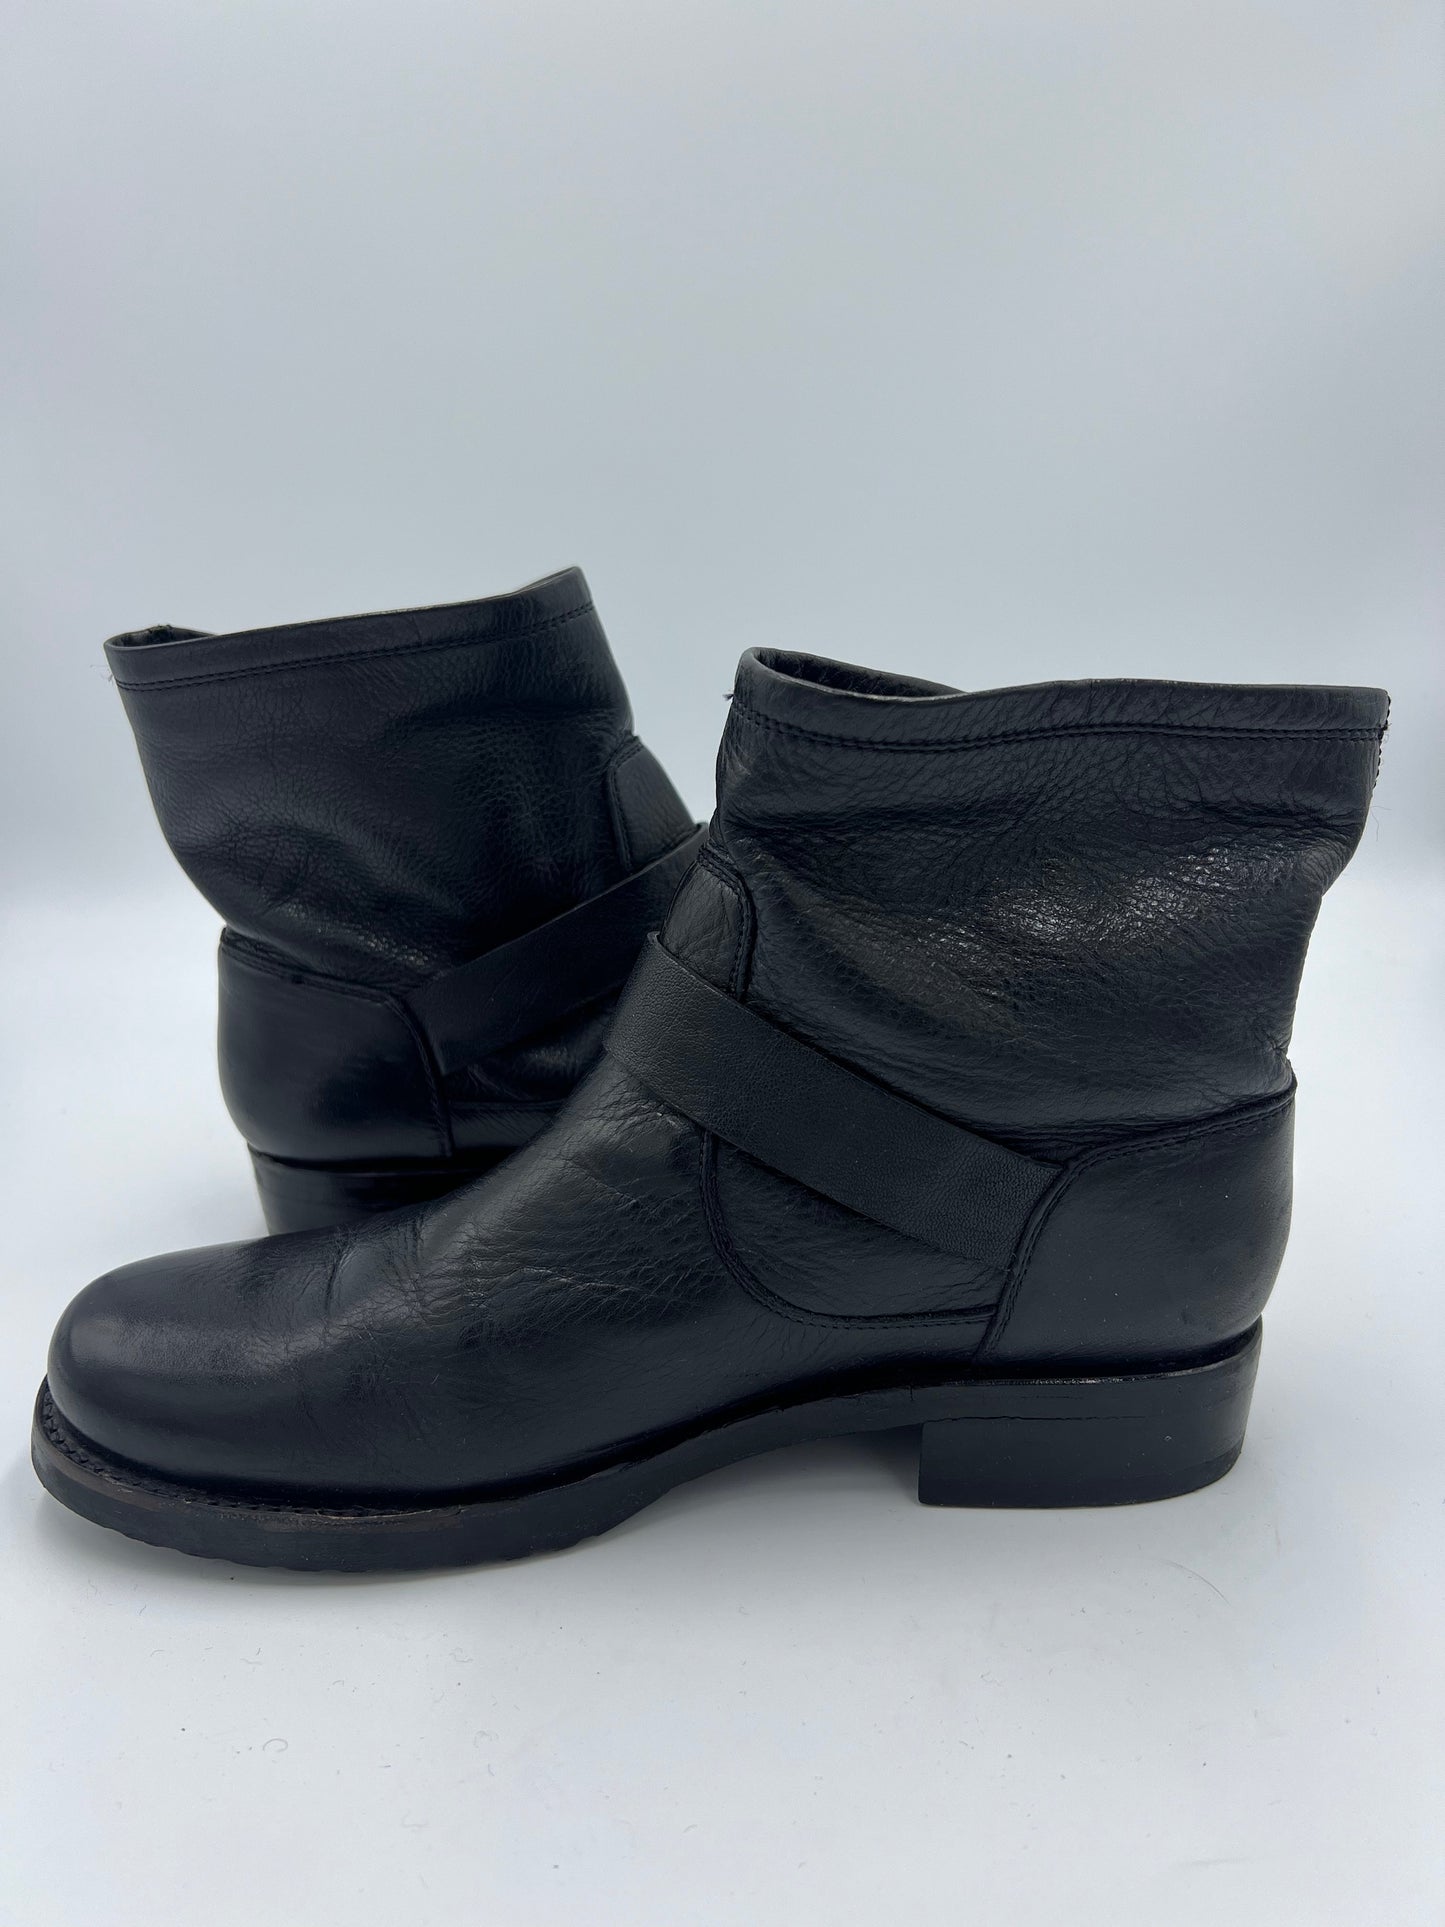 Boots Designer By Frye  Size: 8.5